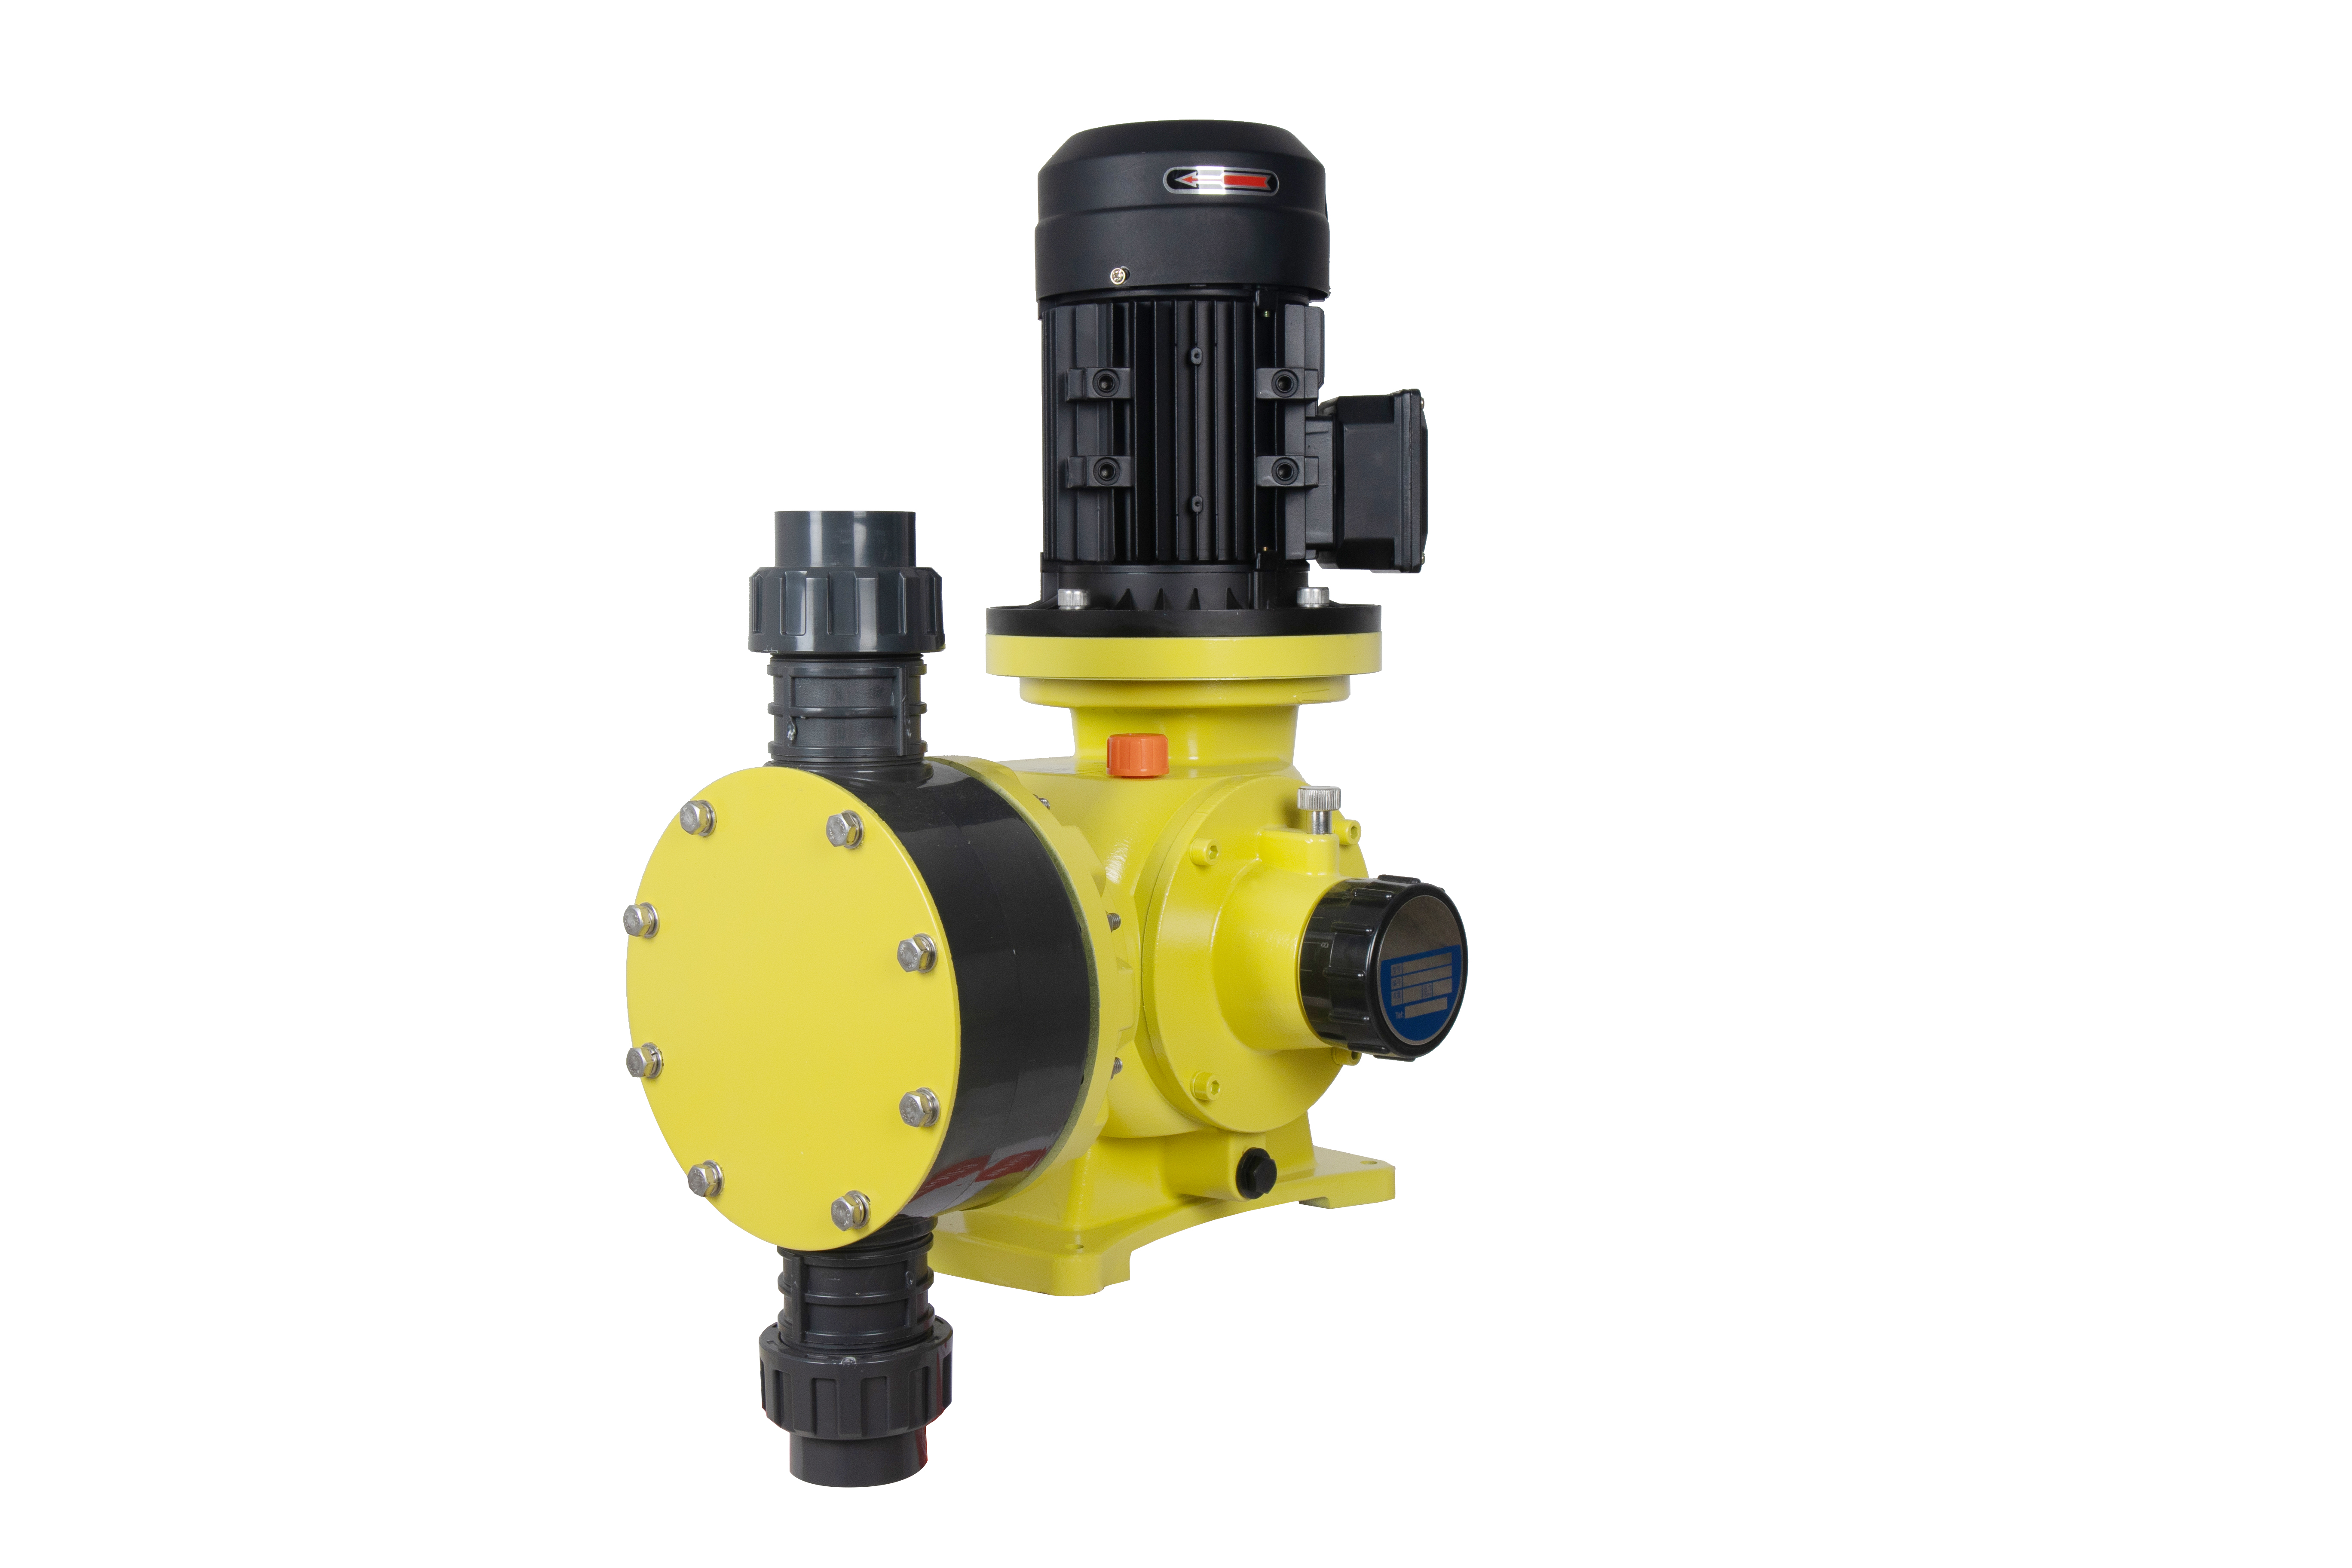 What problems should be paid attention to when installing metering pump